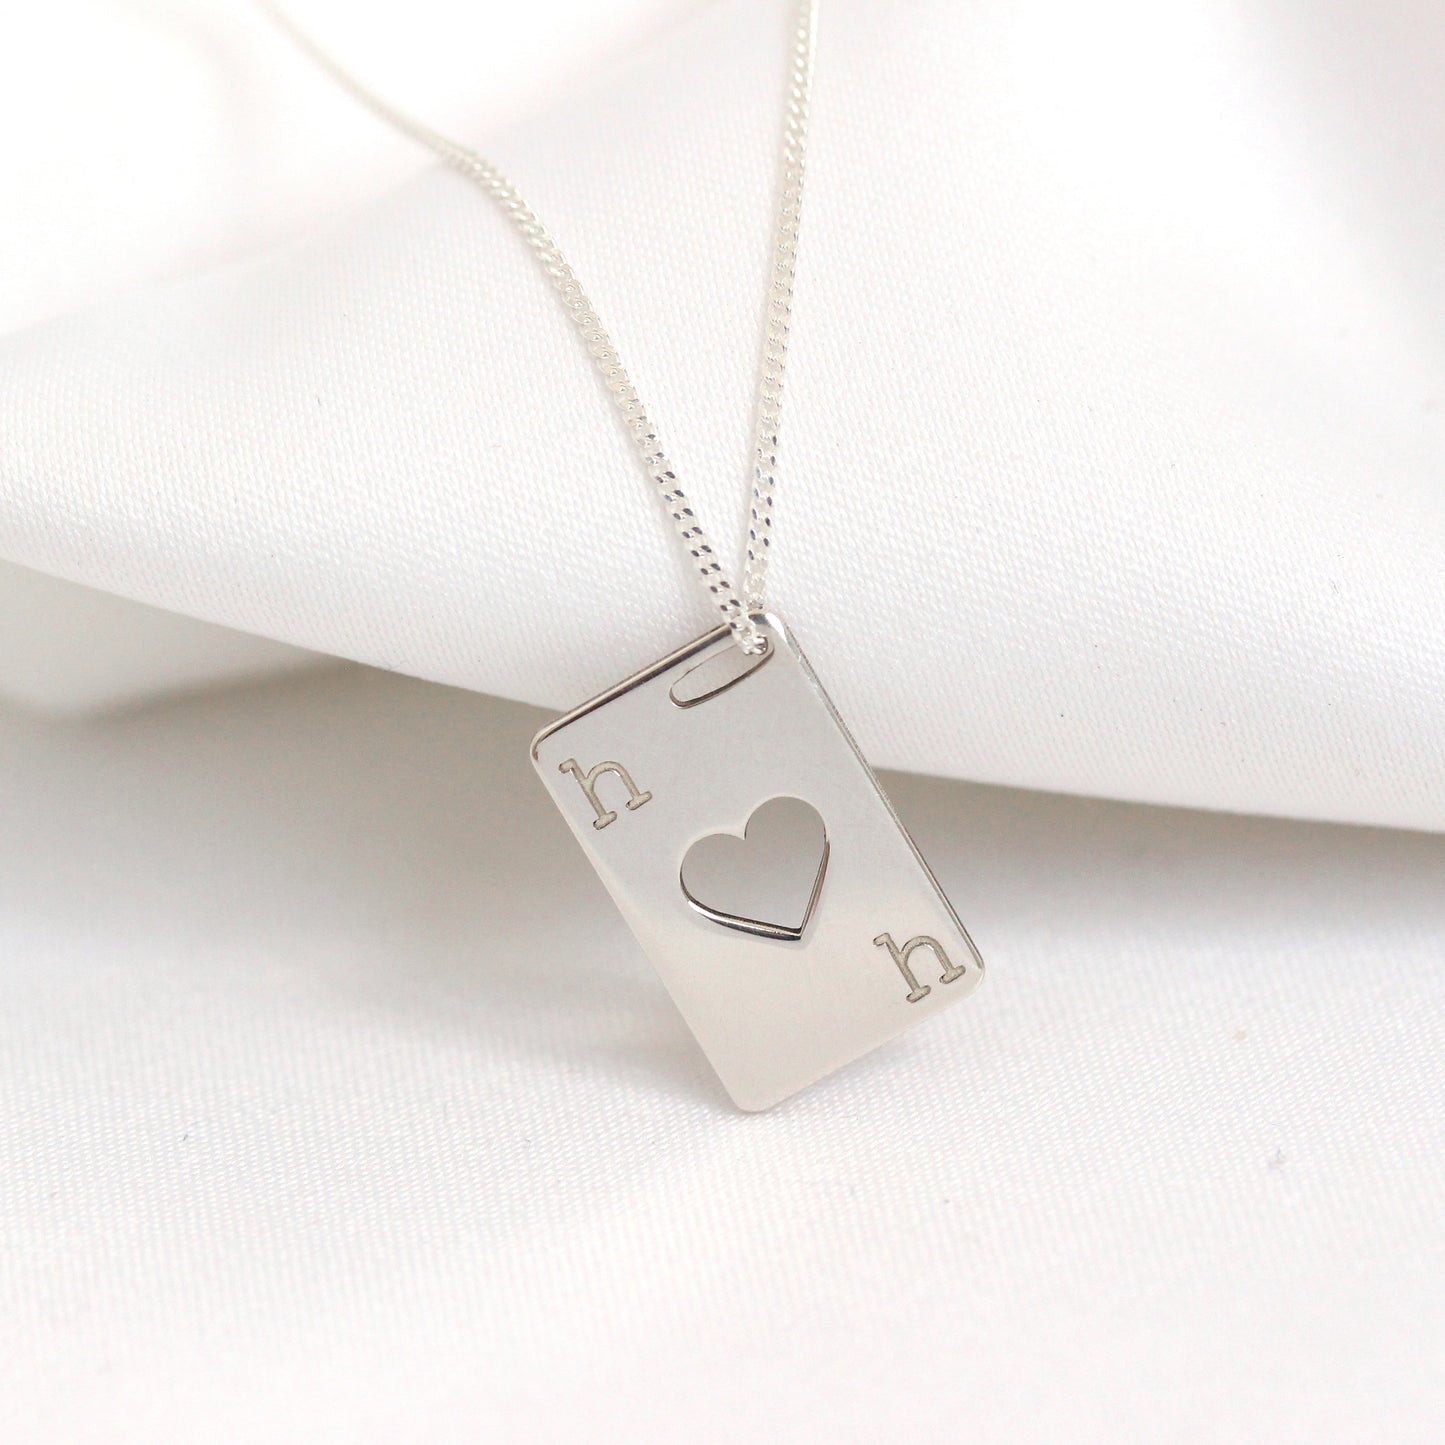 Bespoke Sterling Silver Hearts Playing Card Necklace 14-32 Inches